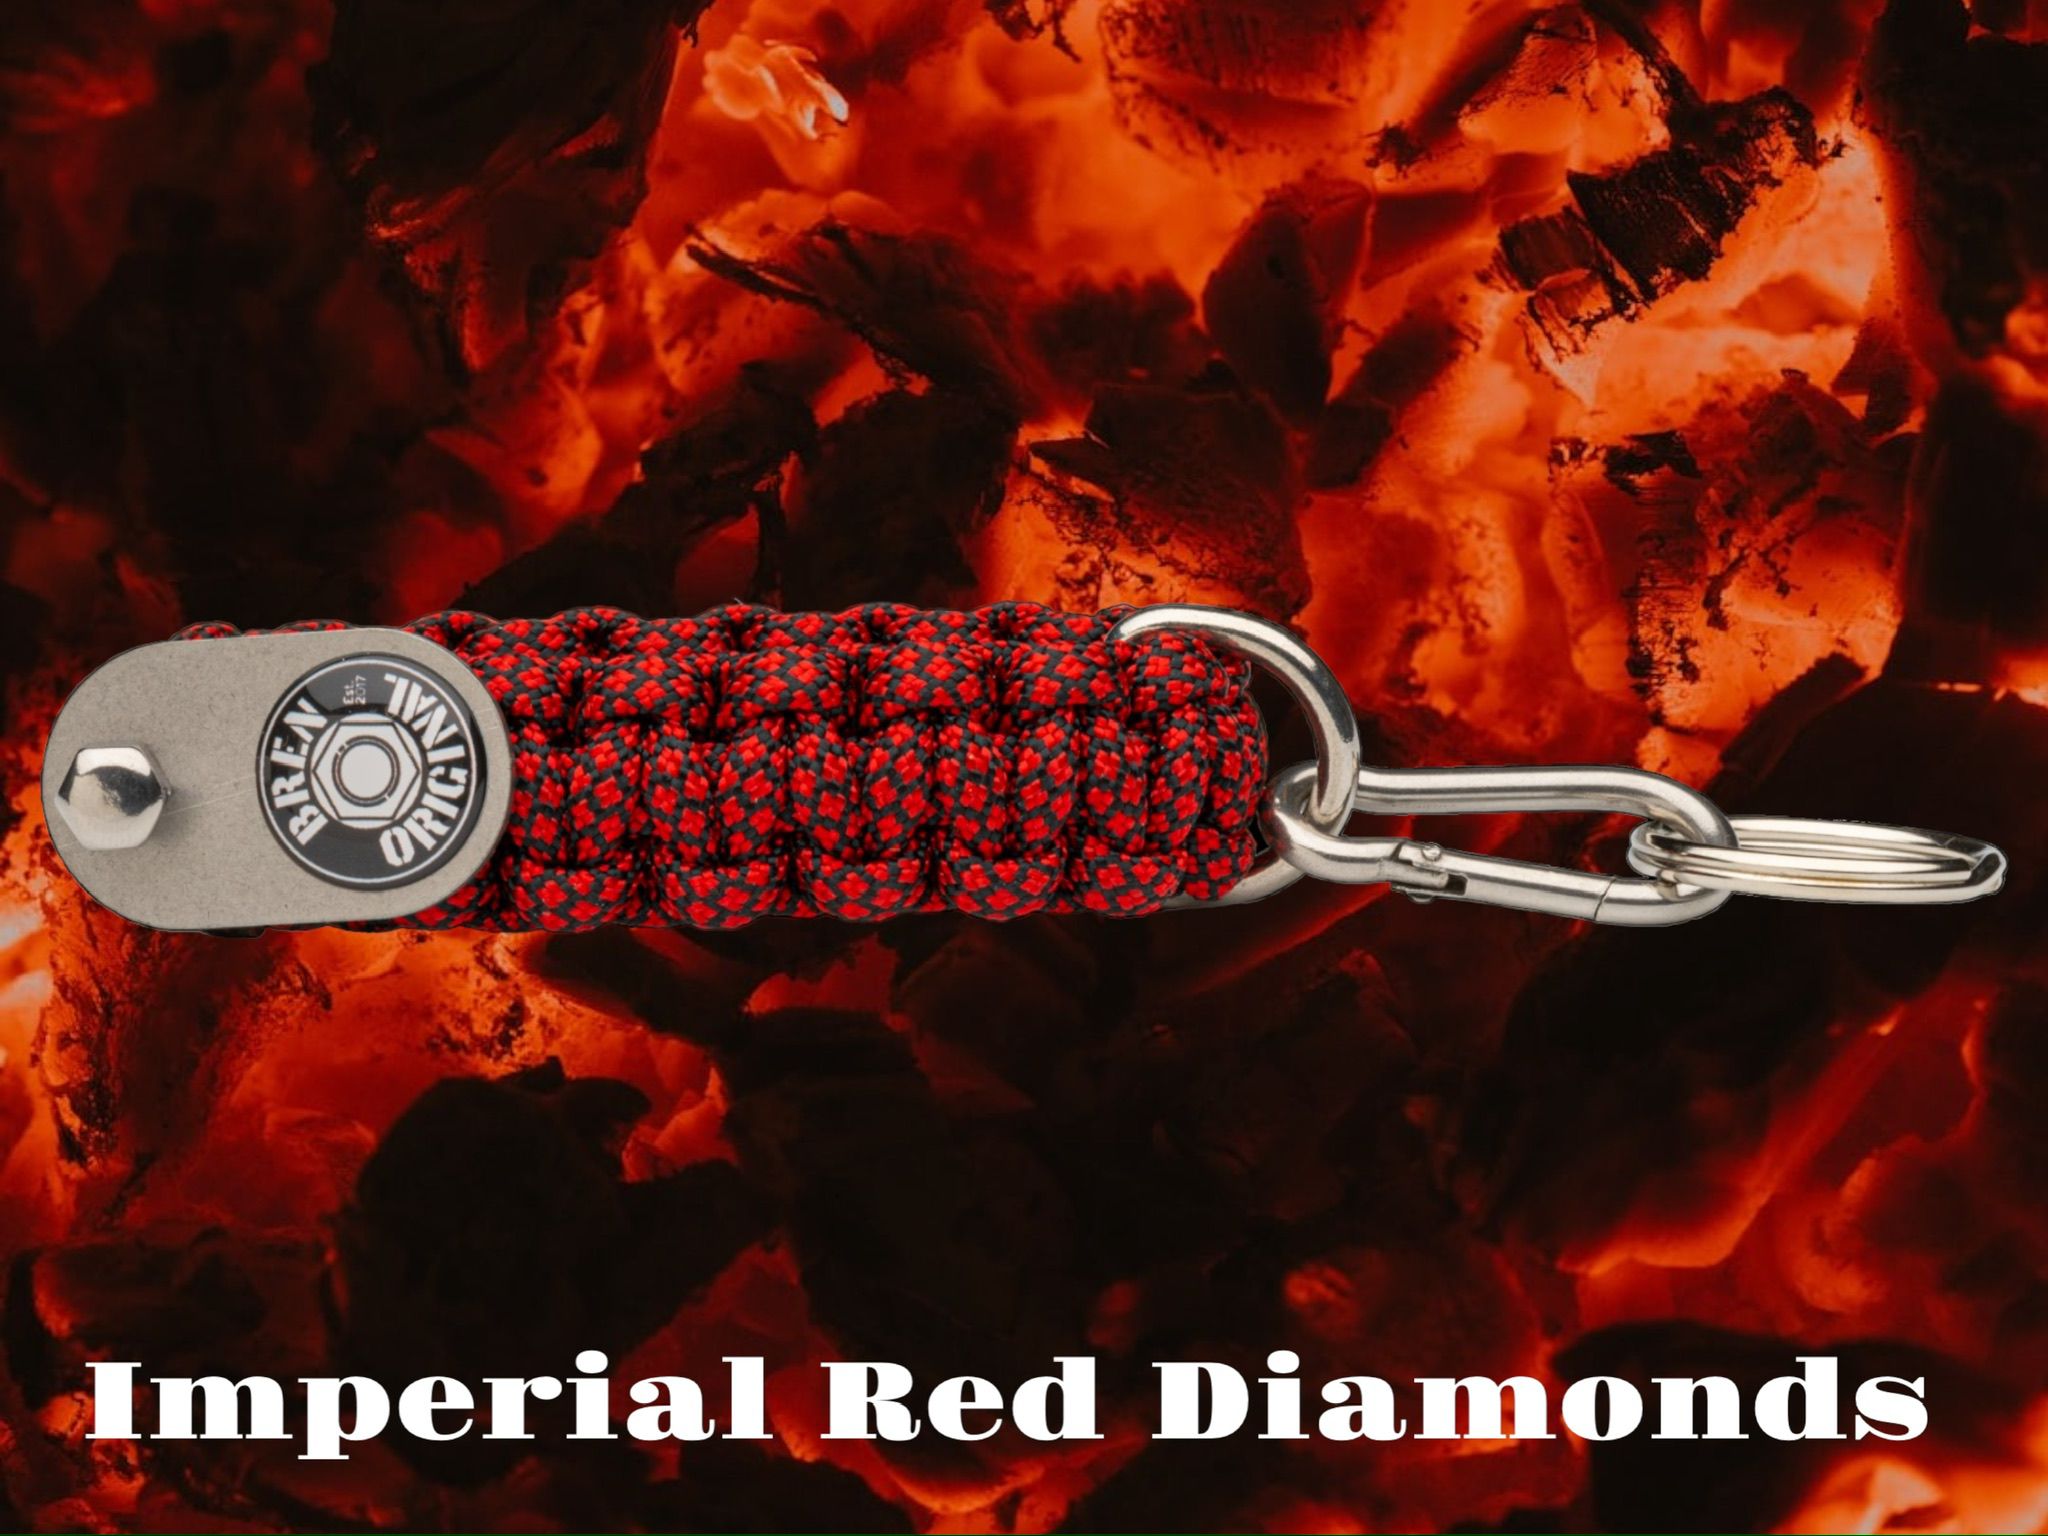 Imperial Red Diamonds